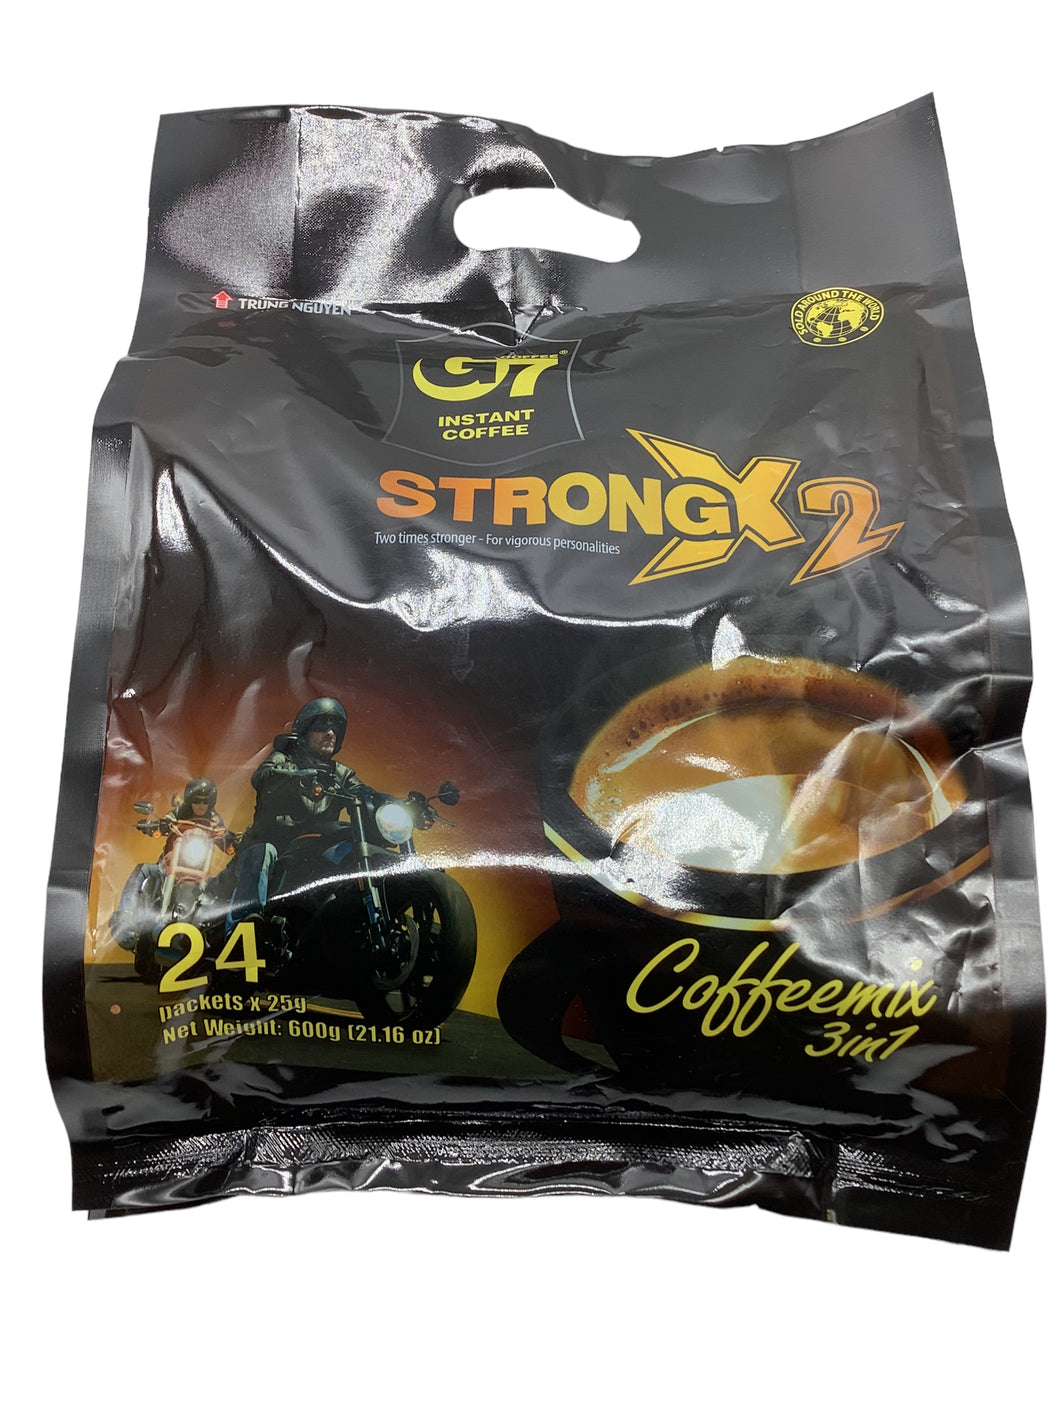 Trung Nguyen G7 2XStrong Instant Coffee (24 bags)